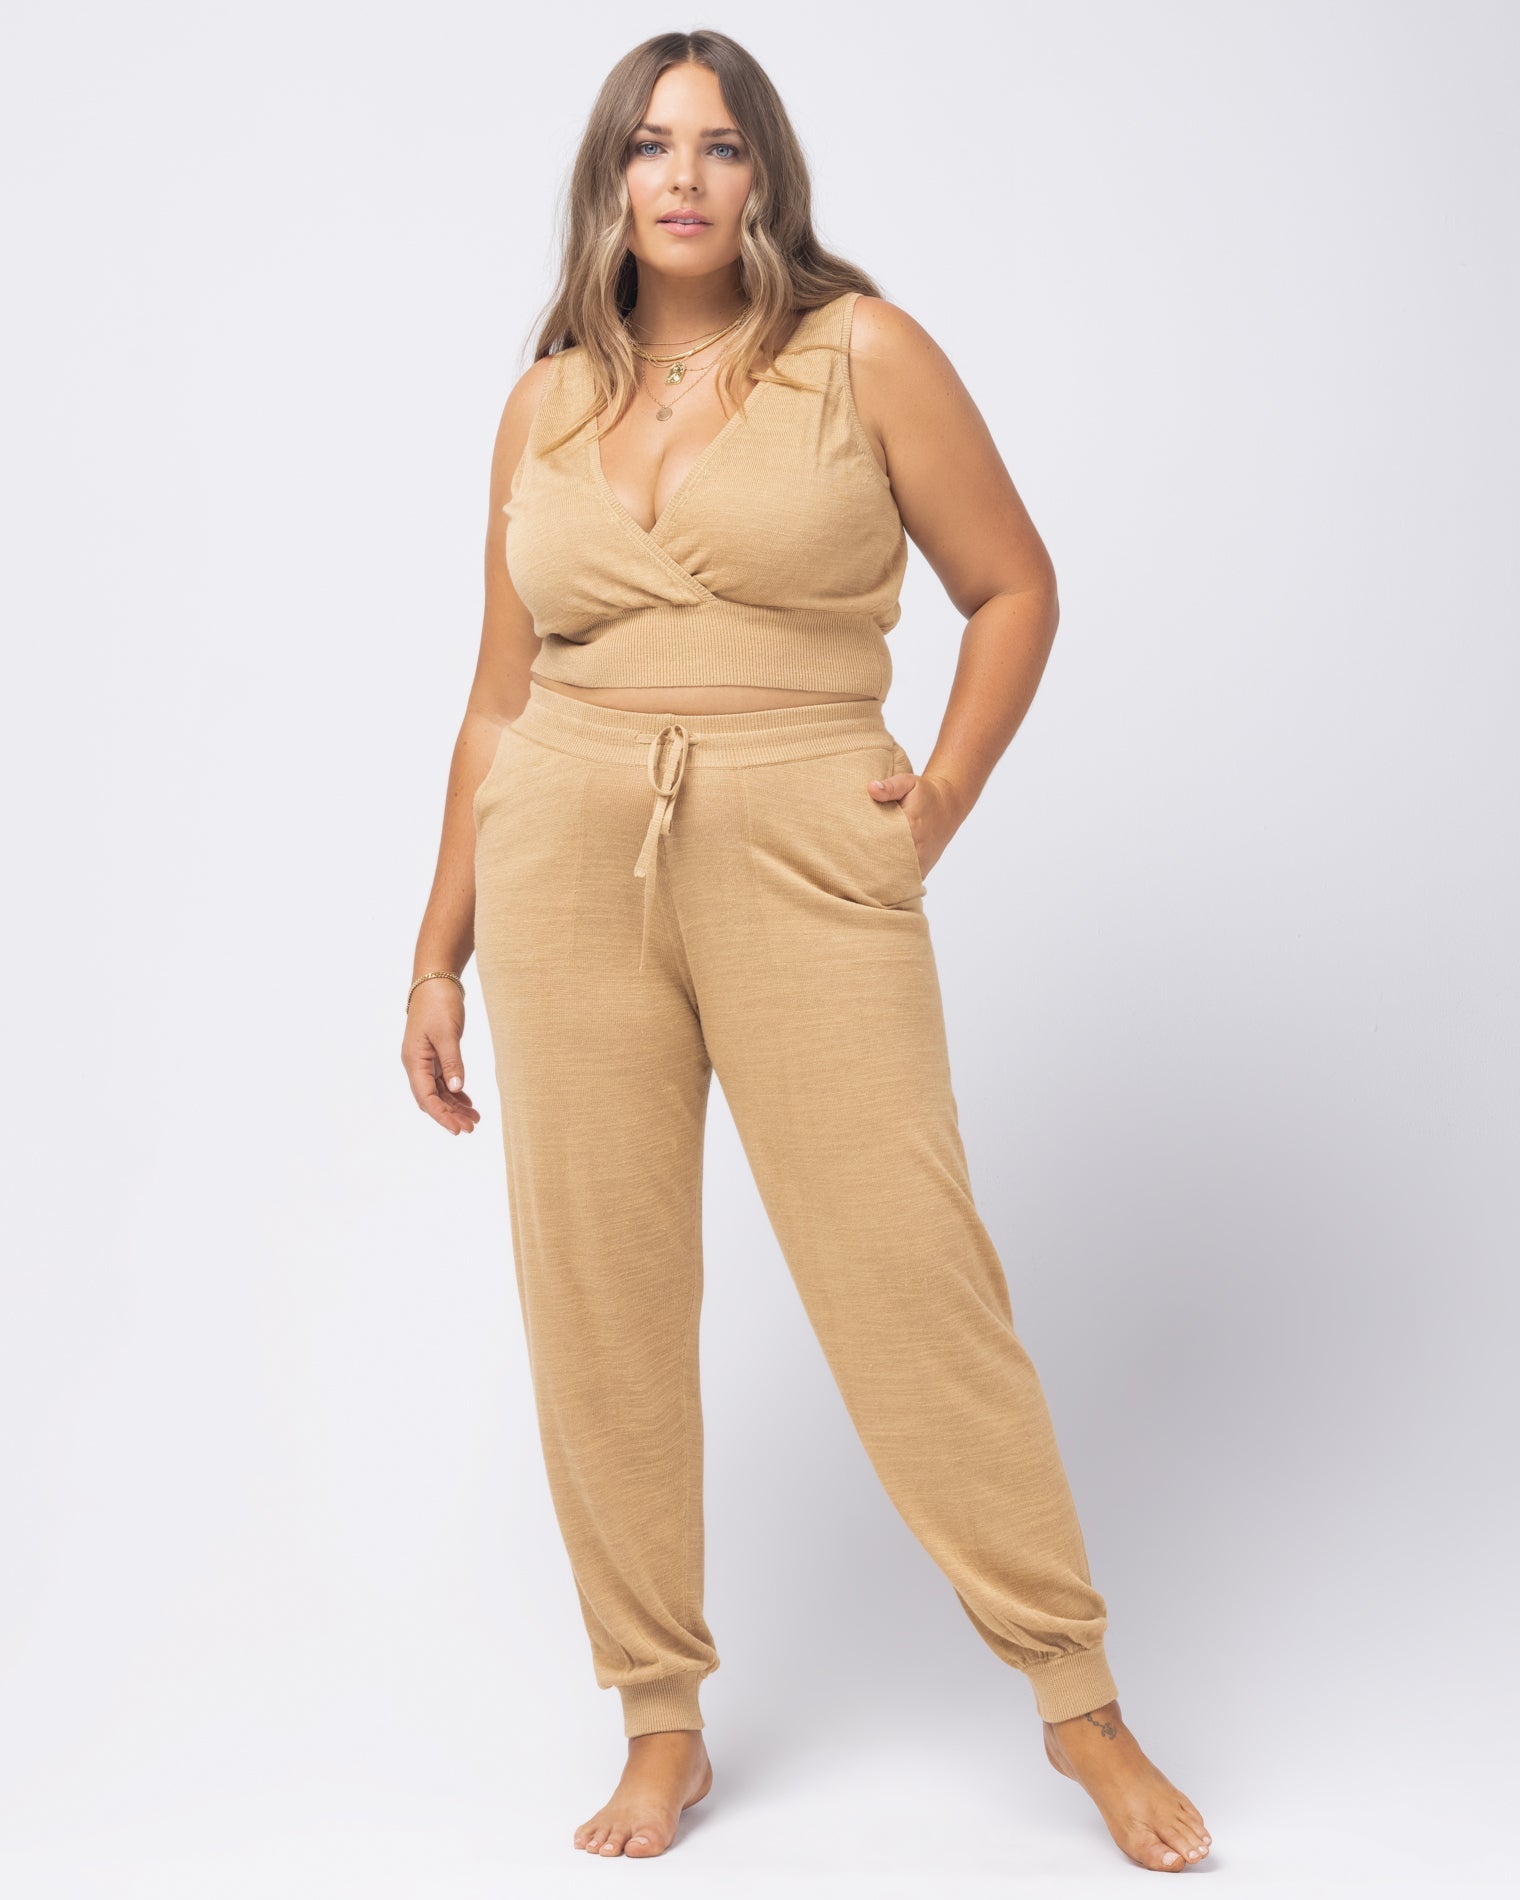 Azores Pant Toffee | Model: Ali (size: XL)